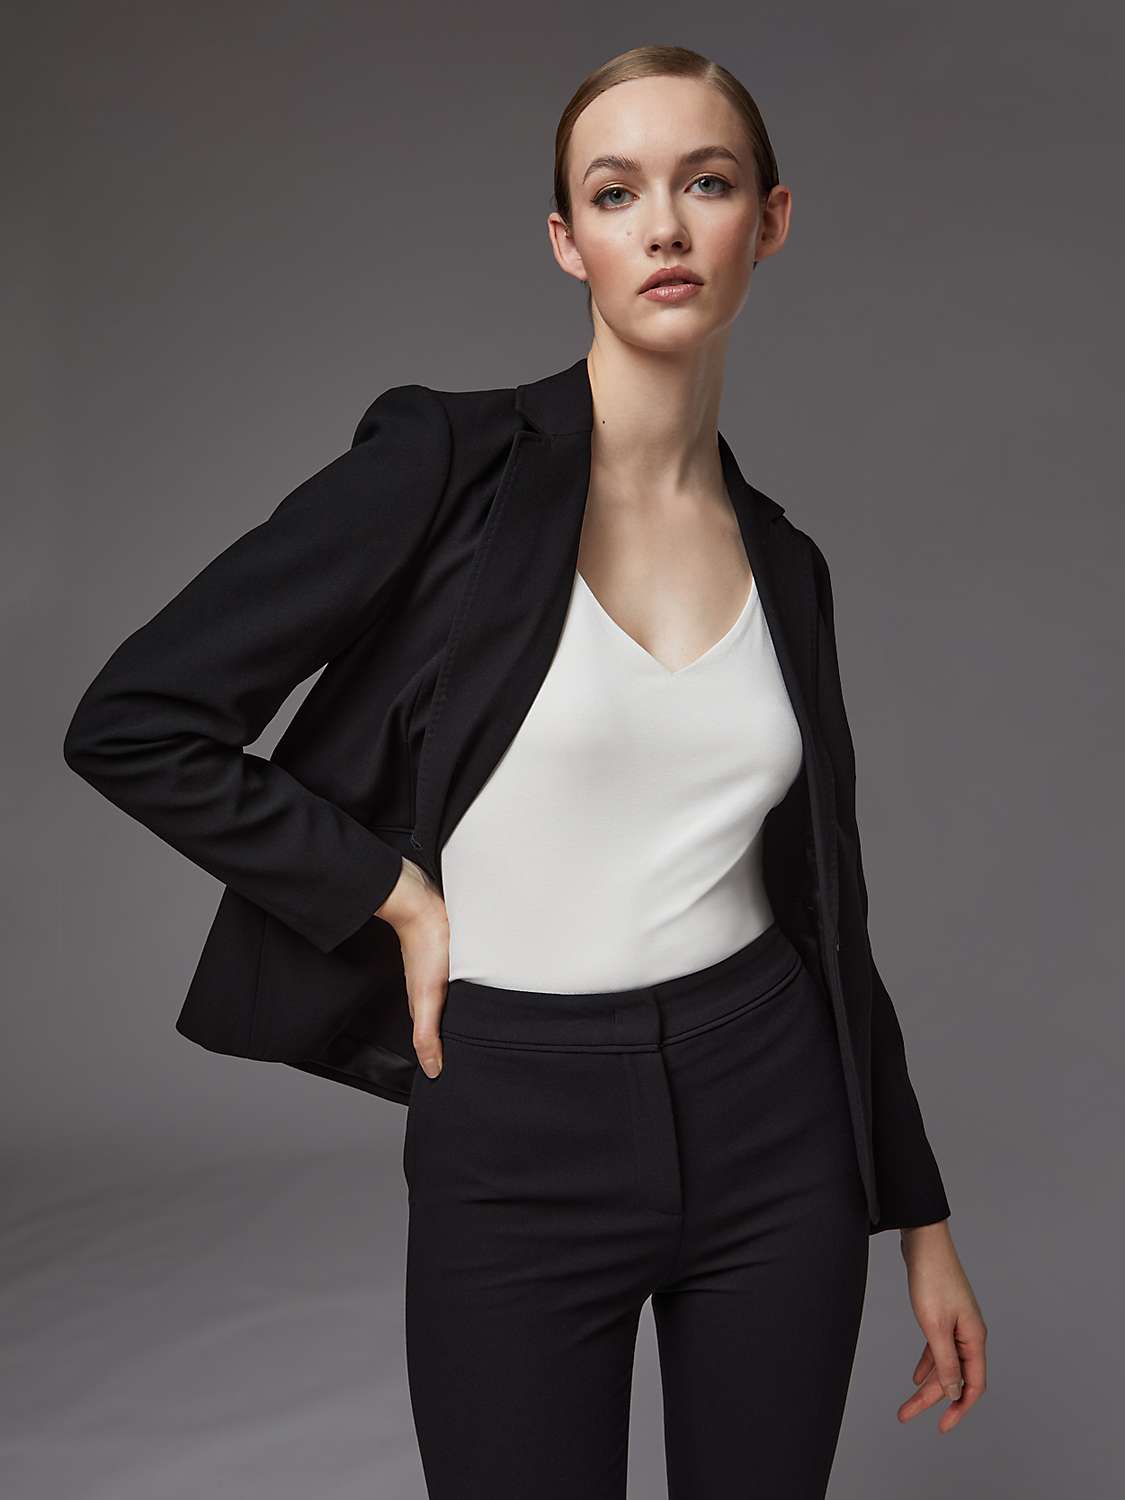 Buy L.K.Bennett Wiley Tailored Trousers Online at johnlewis.com